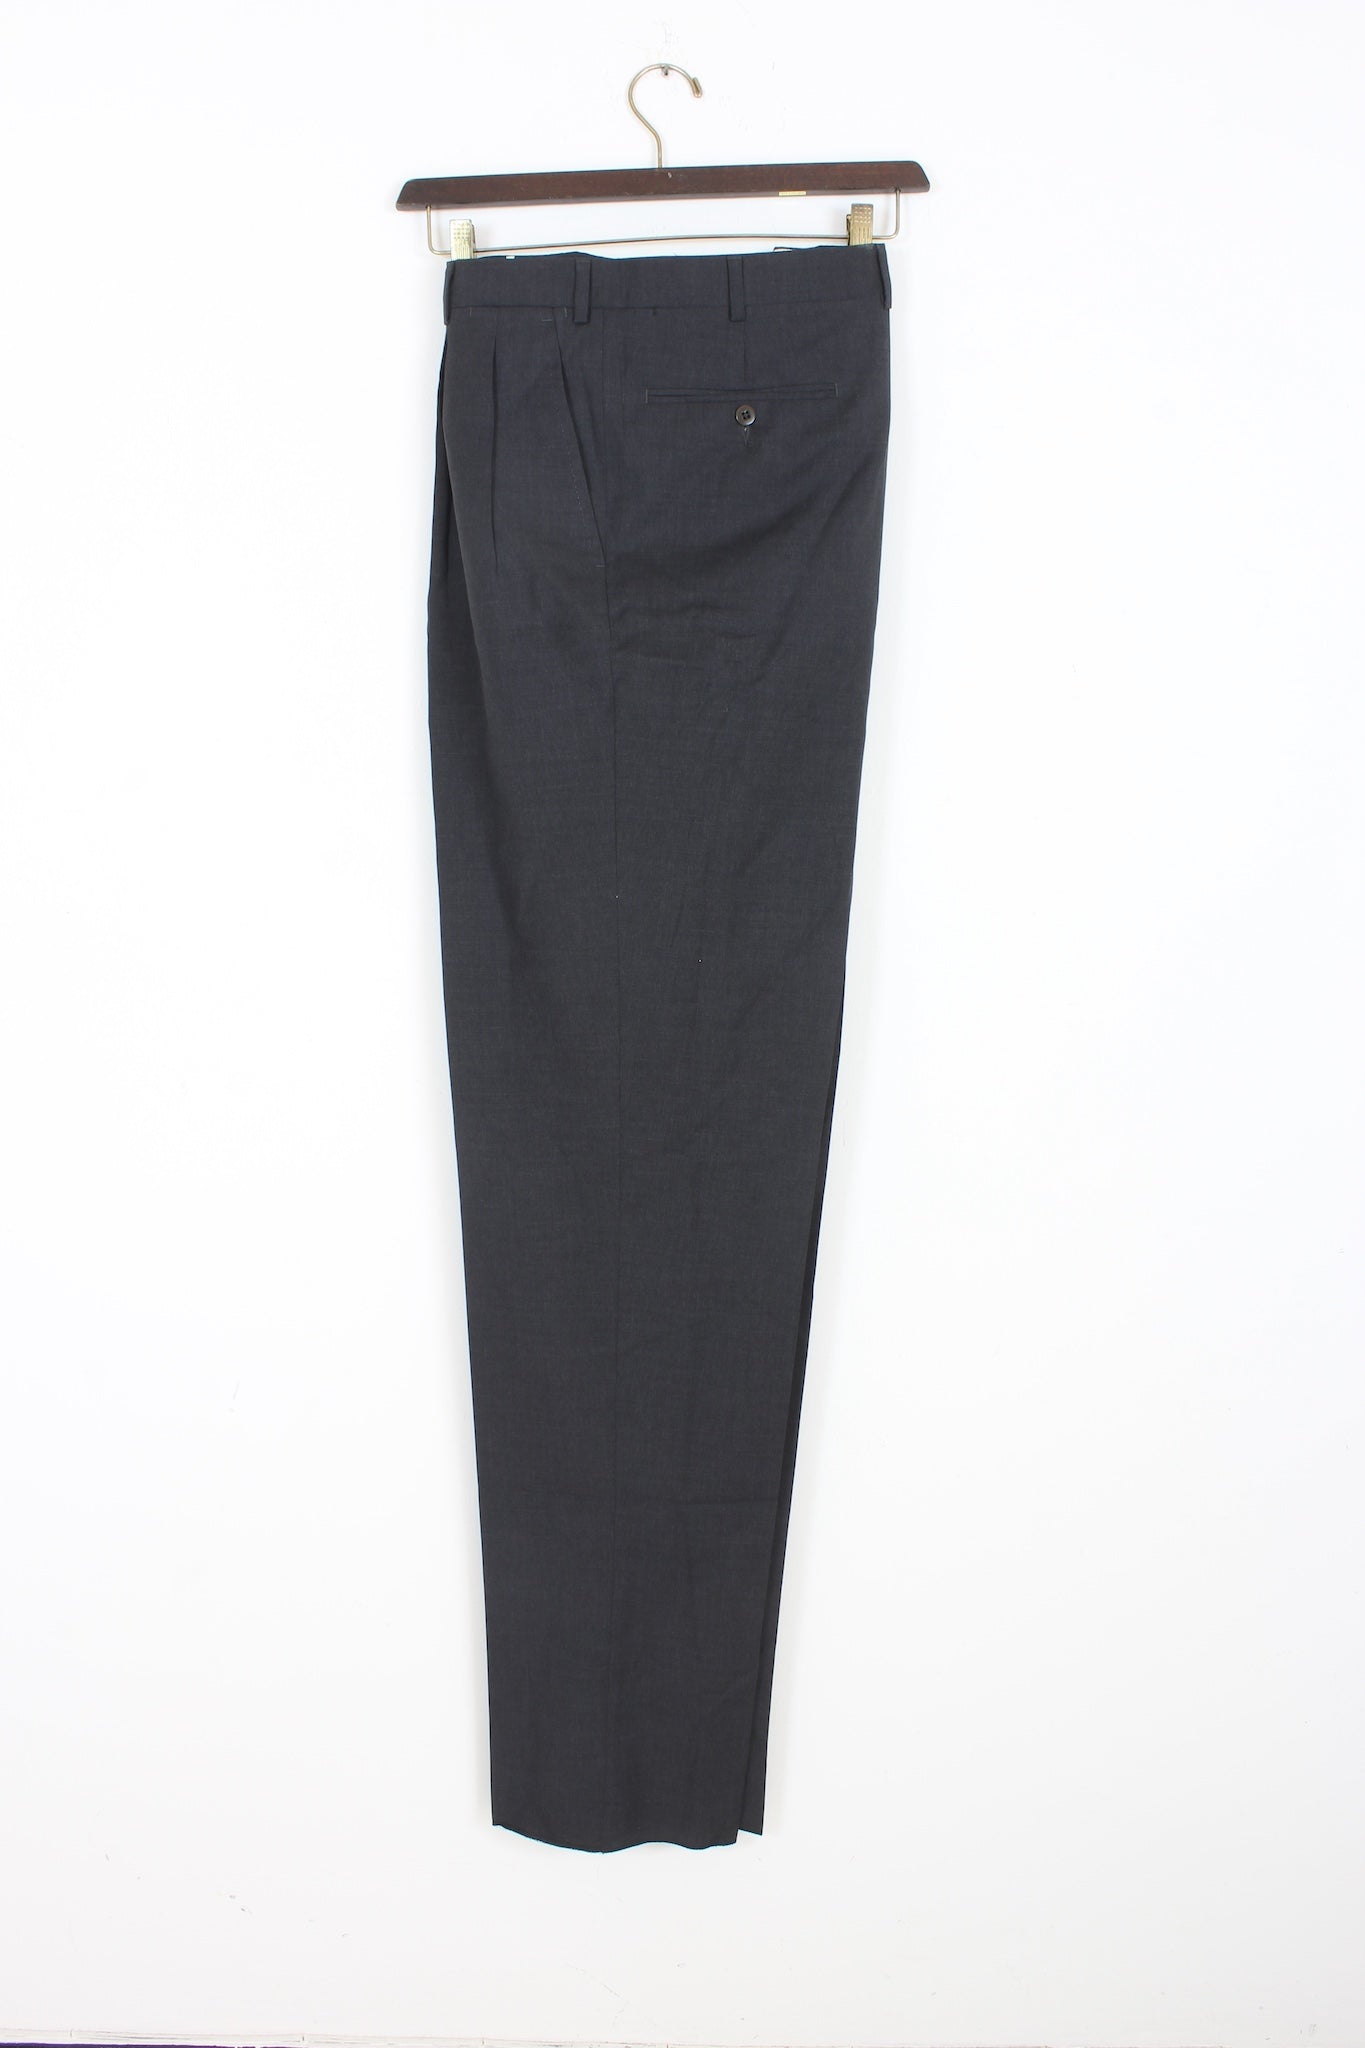 Burberry Grey Classic Trousers Vintage 90s